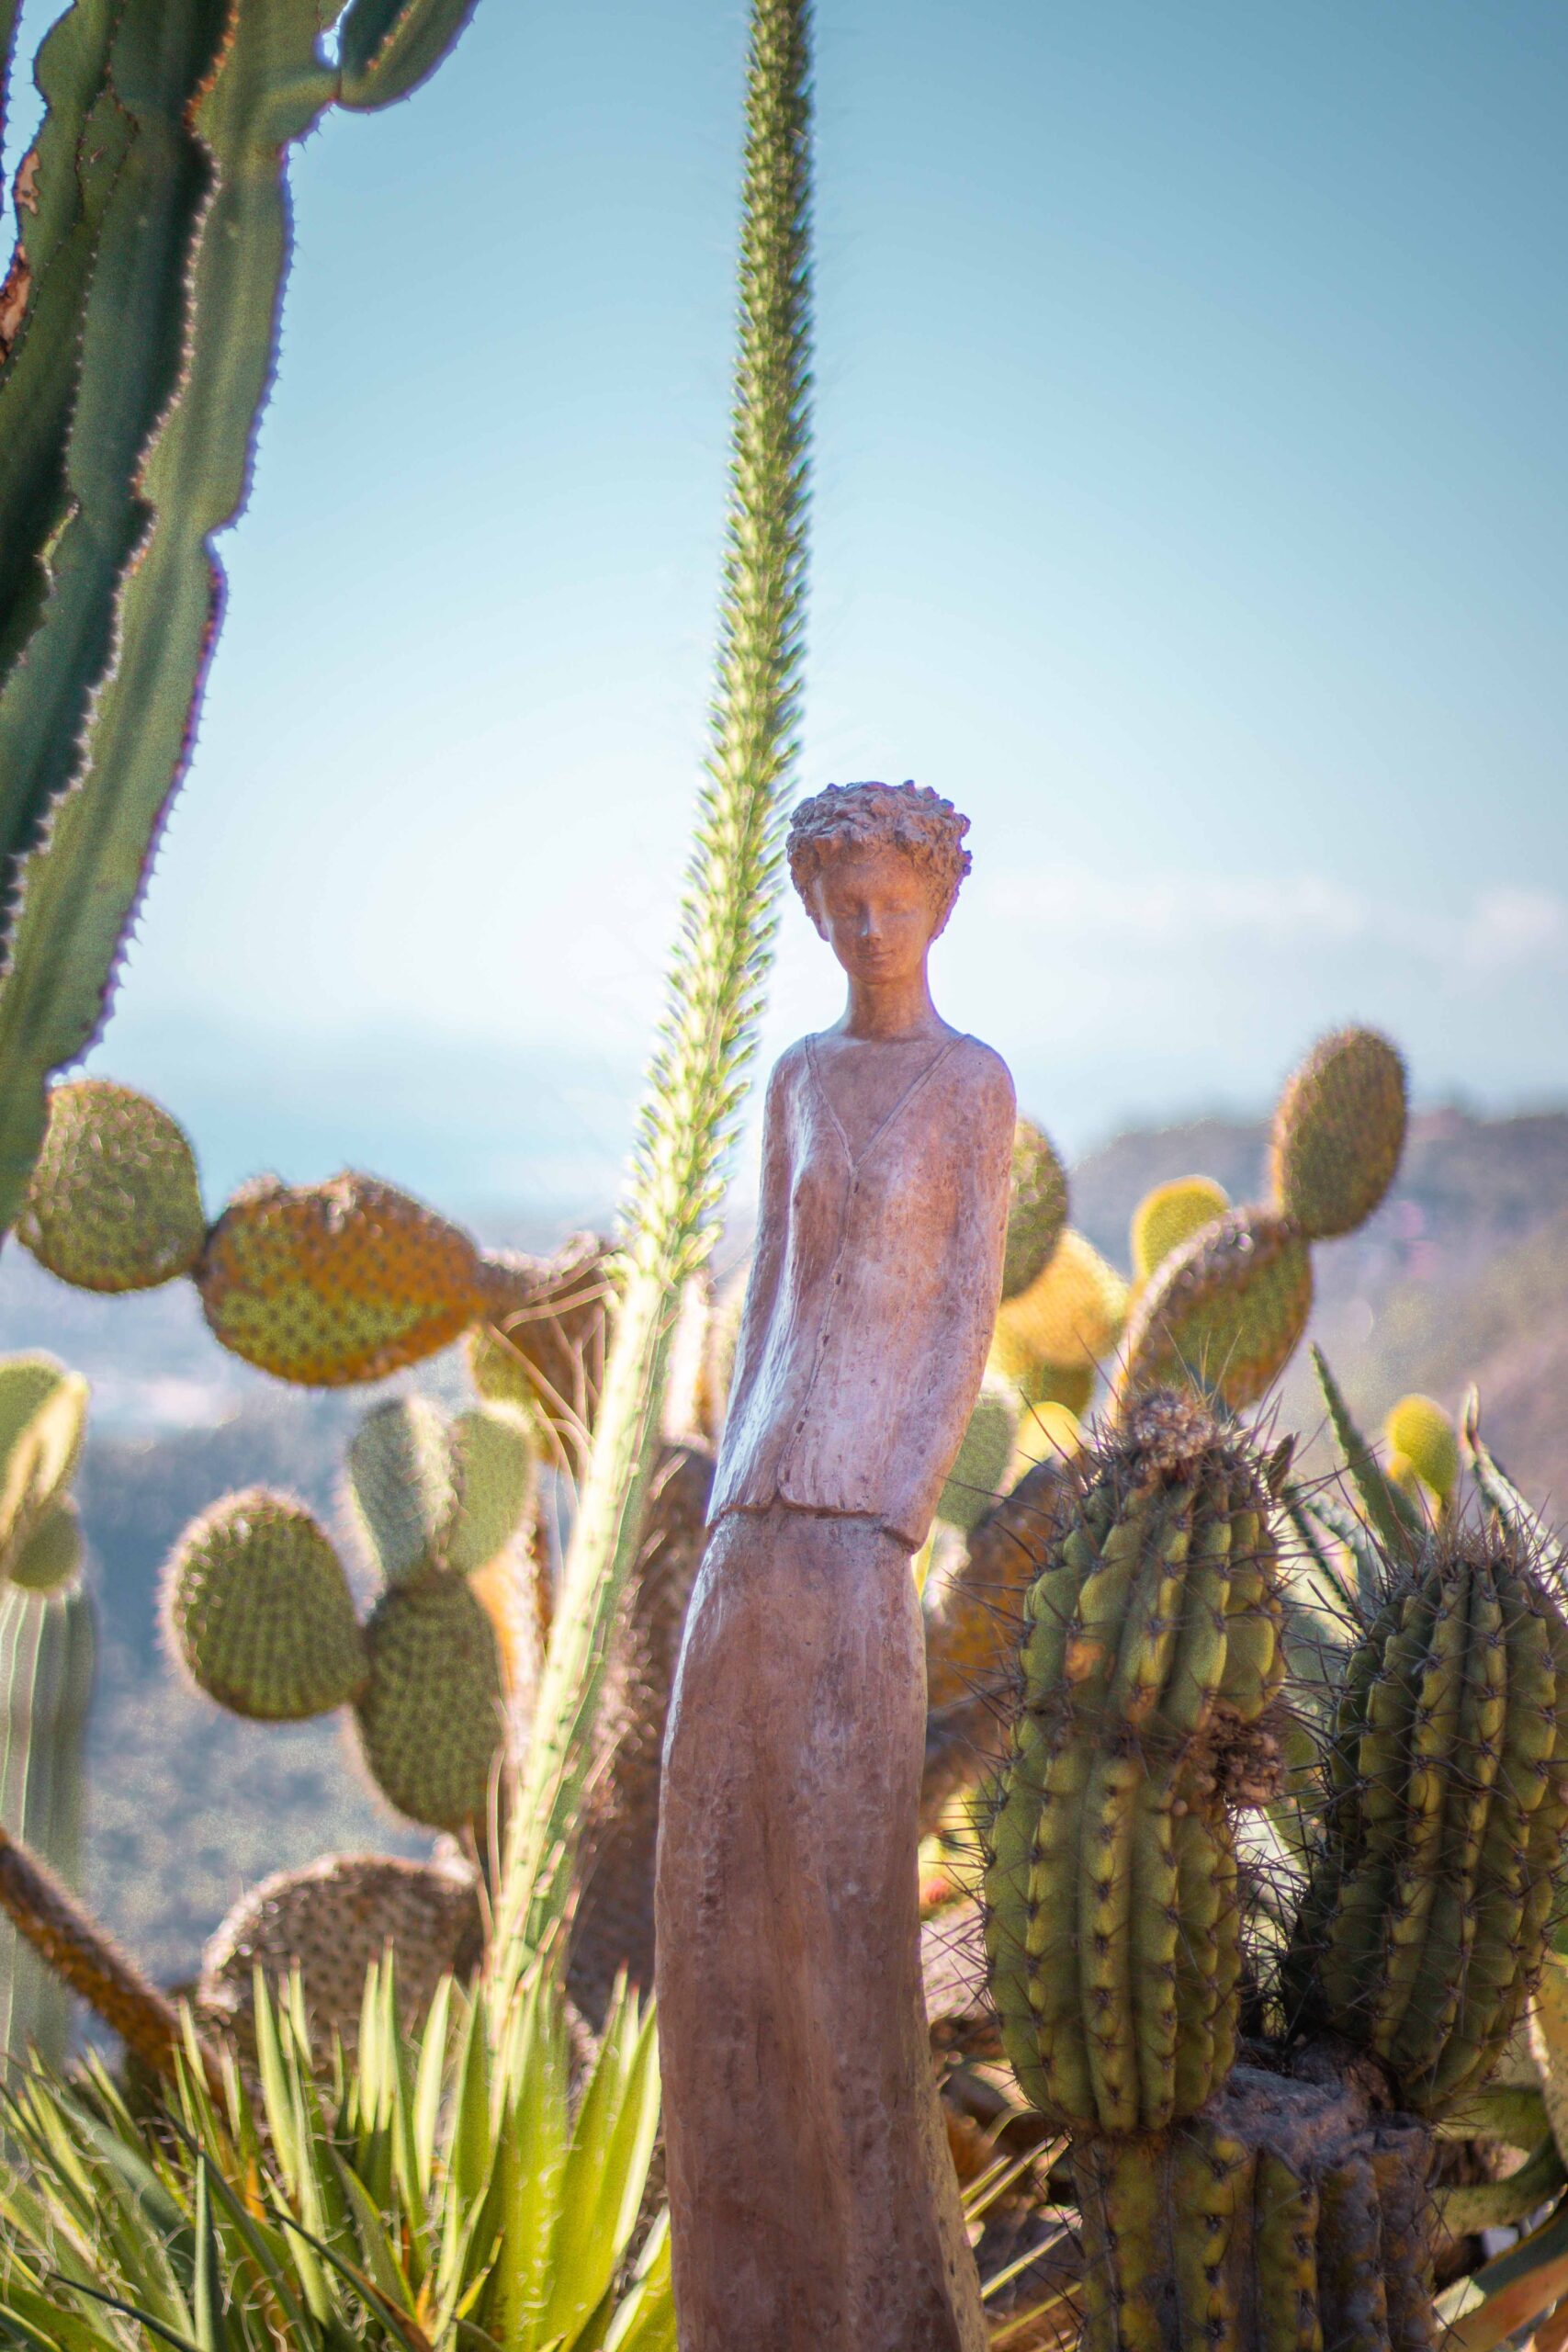 Close-up of a statue made by Jean-Philippe Richard surrounded by cacti in the Eze Exotic Garden on a sunny day in Eze Village, France